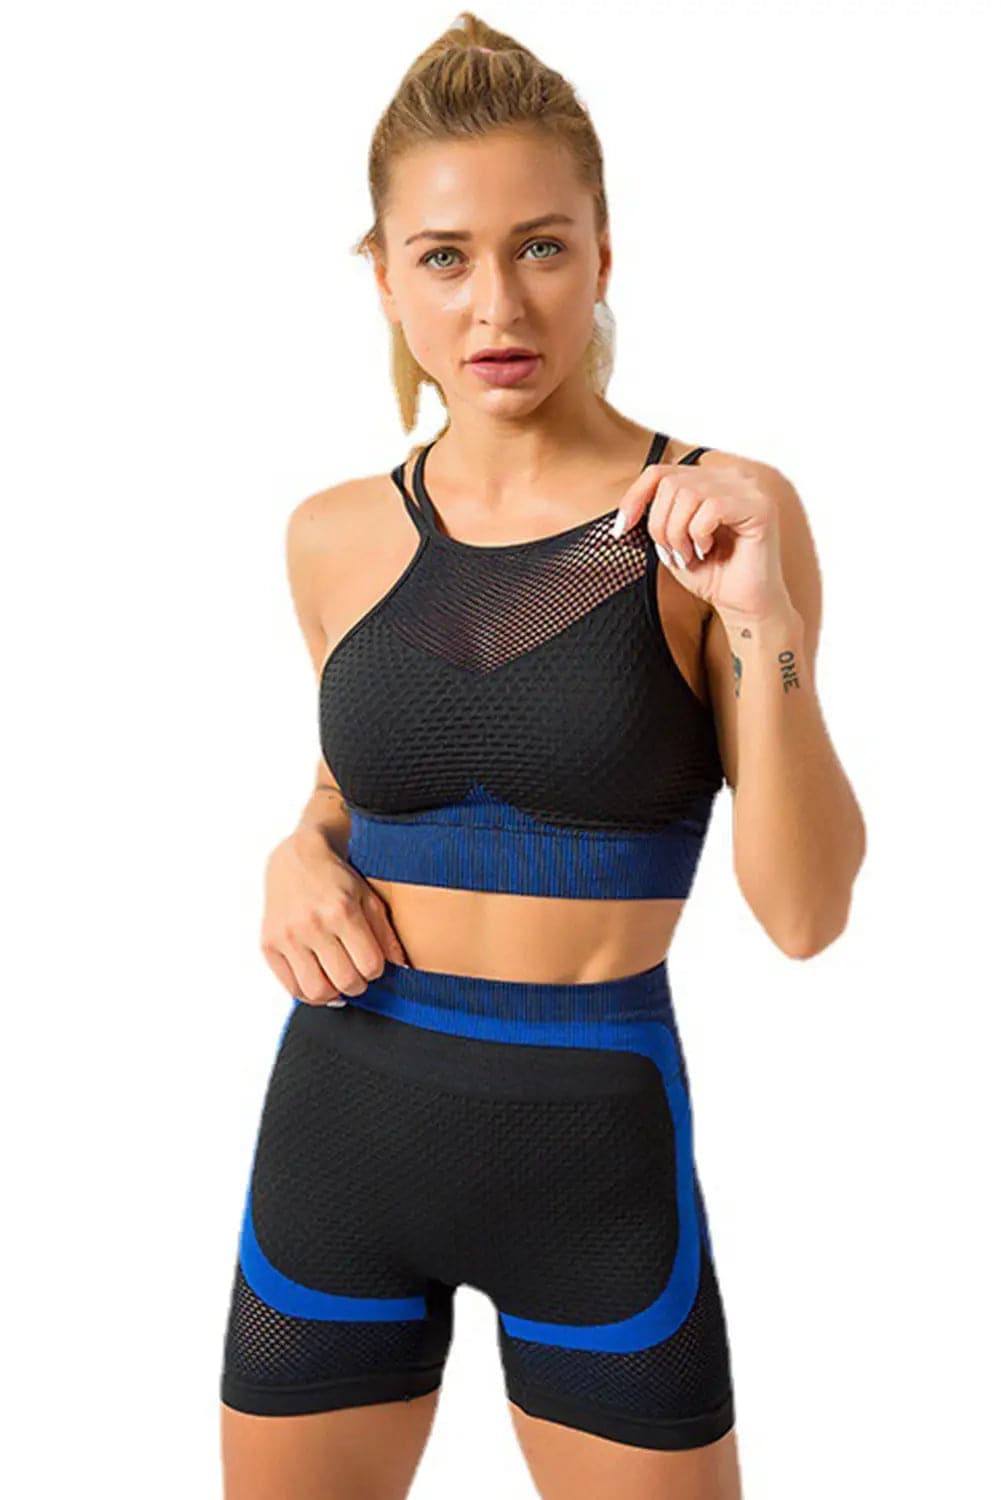 Sky Blue Breathable Mesh Gym Crop Top & Shorts Sports Set - Activewear